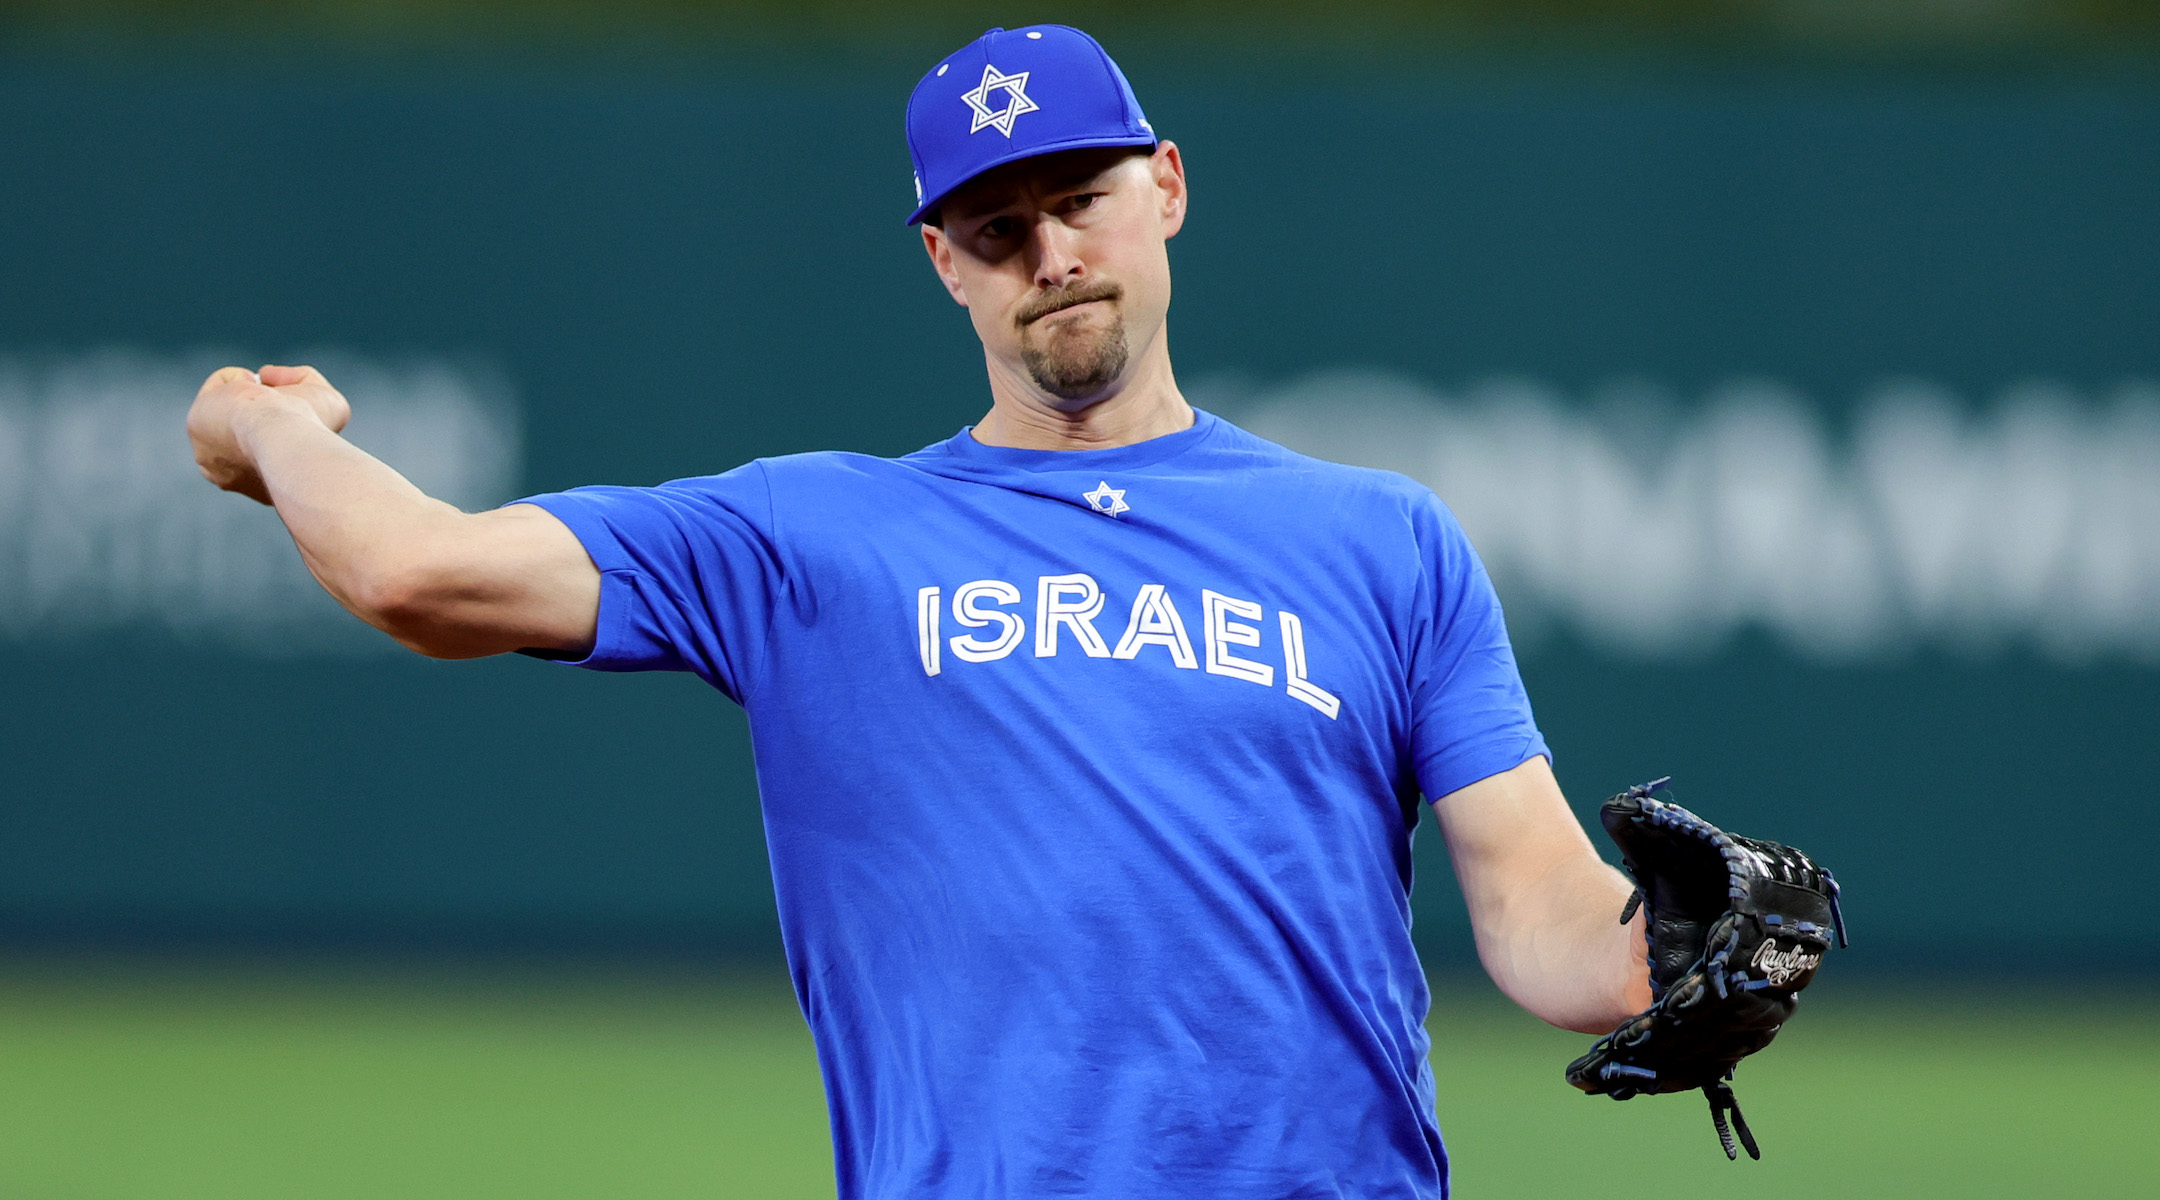 Ryan Lavarnway, a Team Israel veteran and World Series champ, retires from MLB